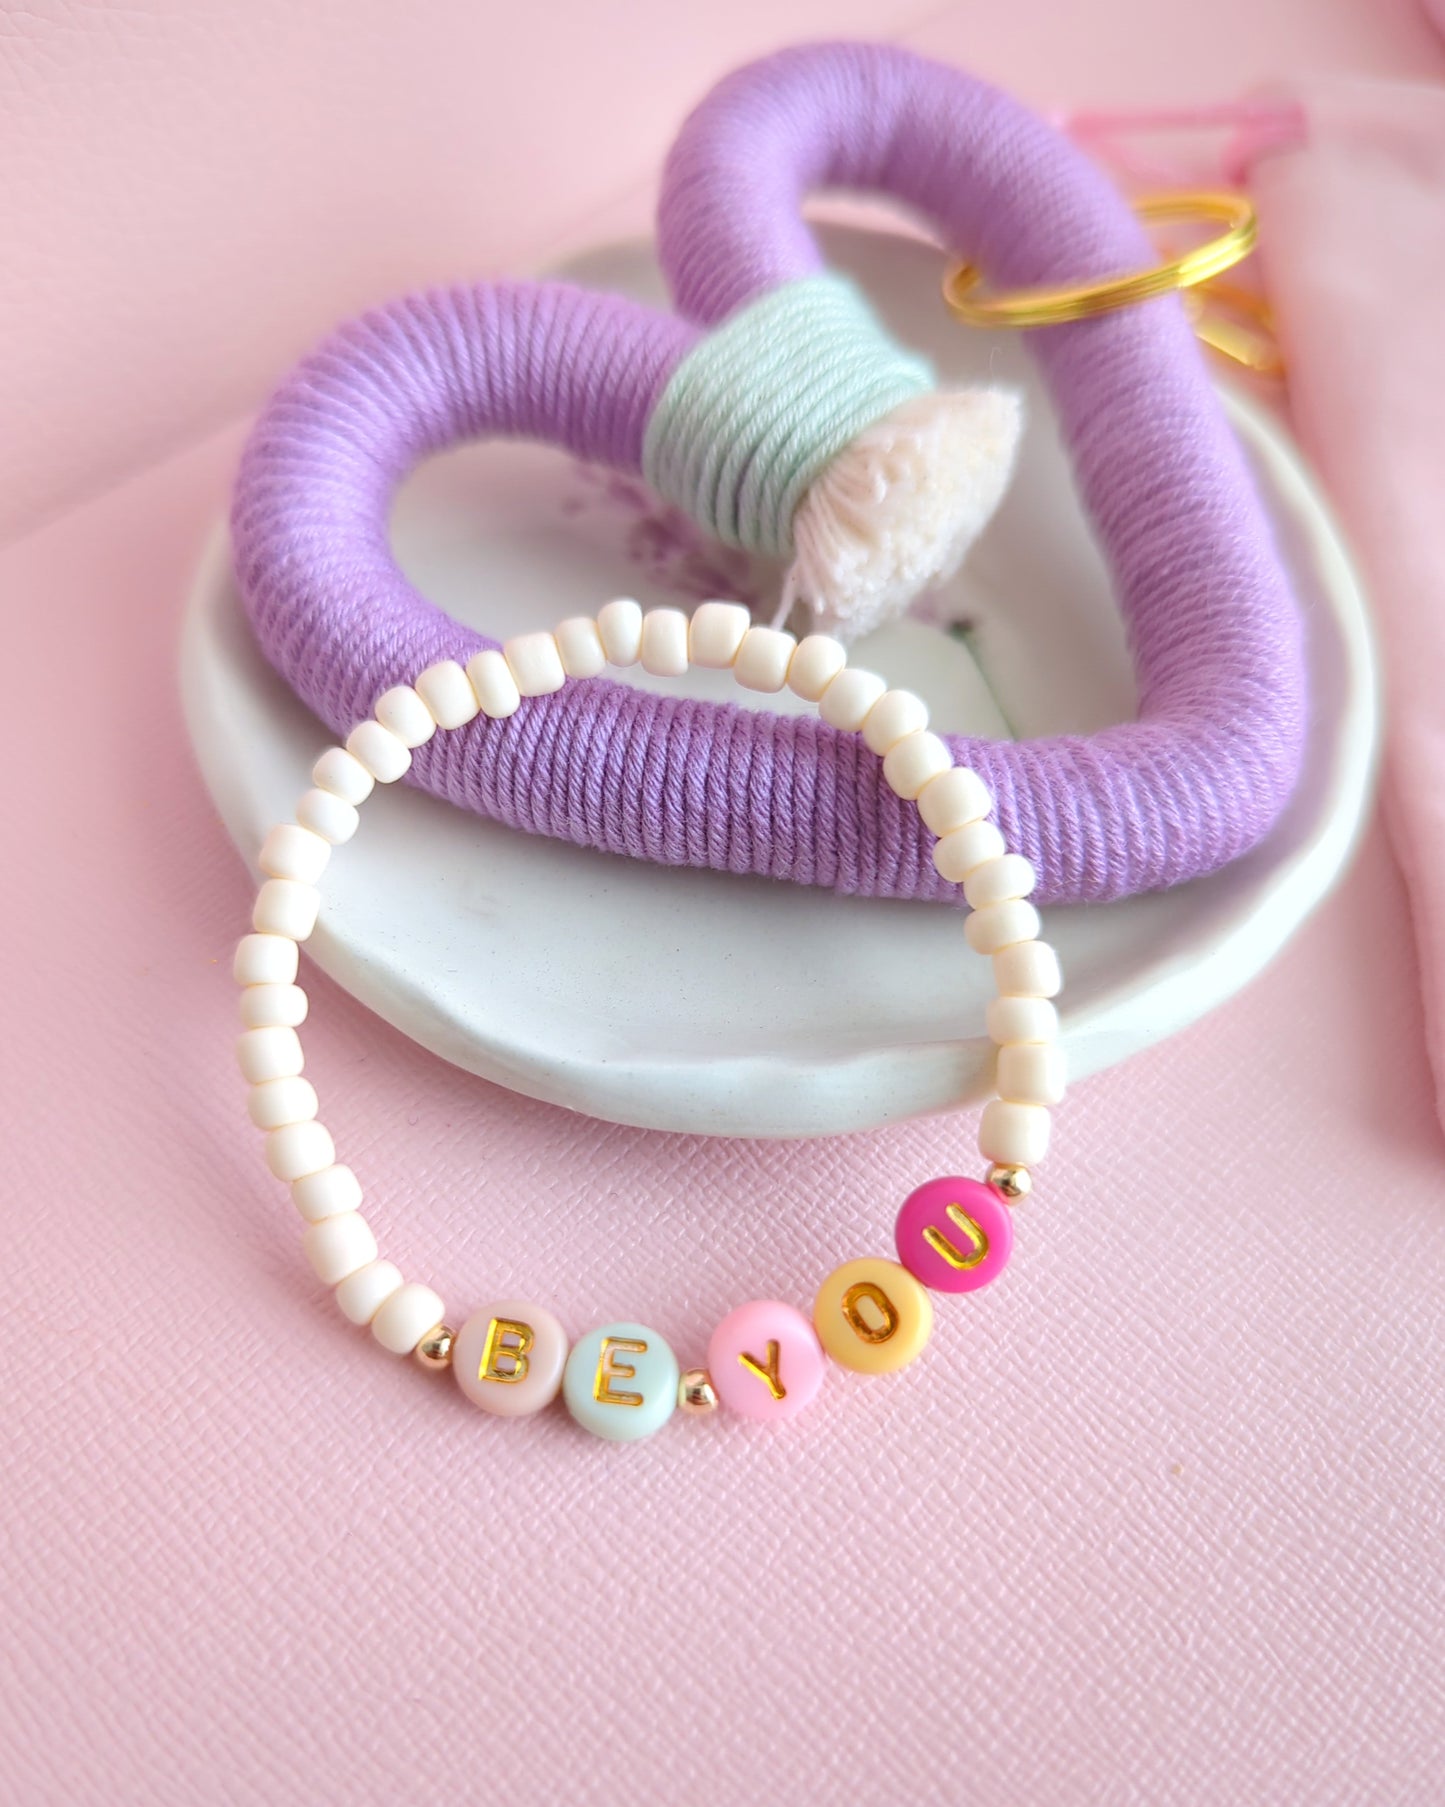 'Be You' bracelet by Charmed by Everly